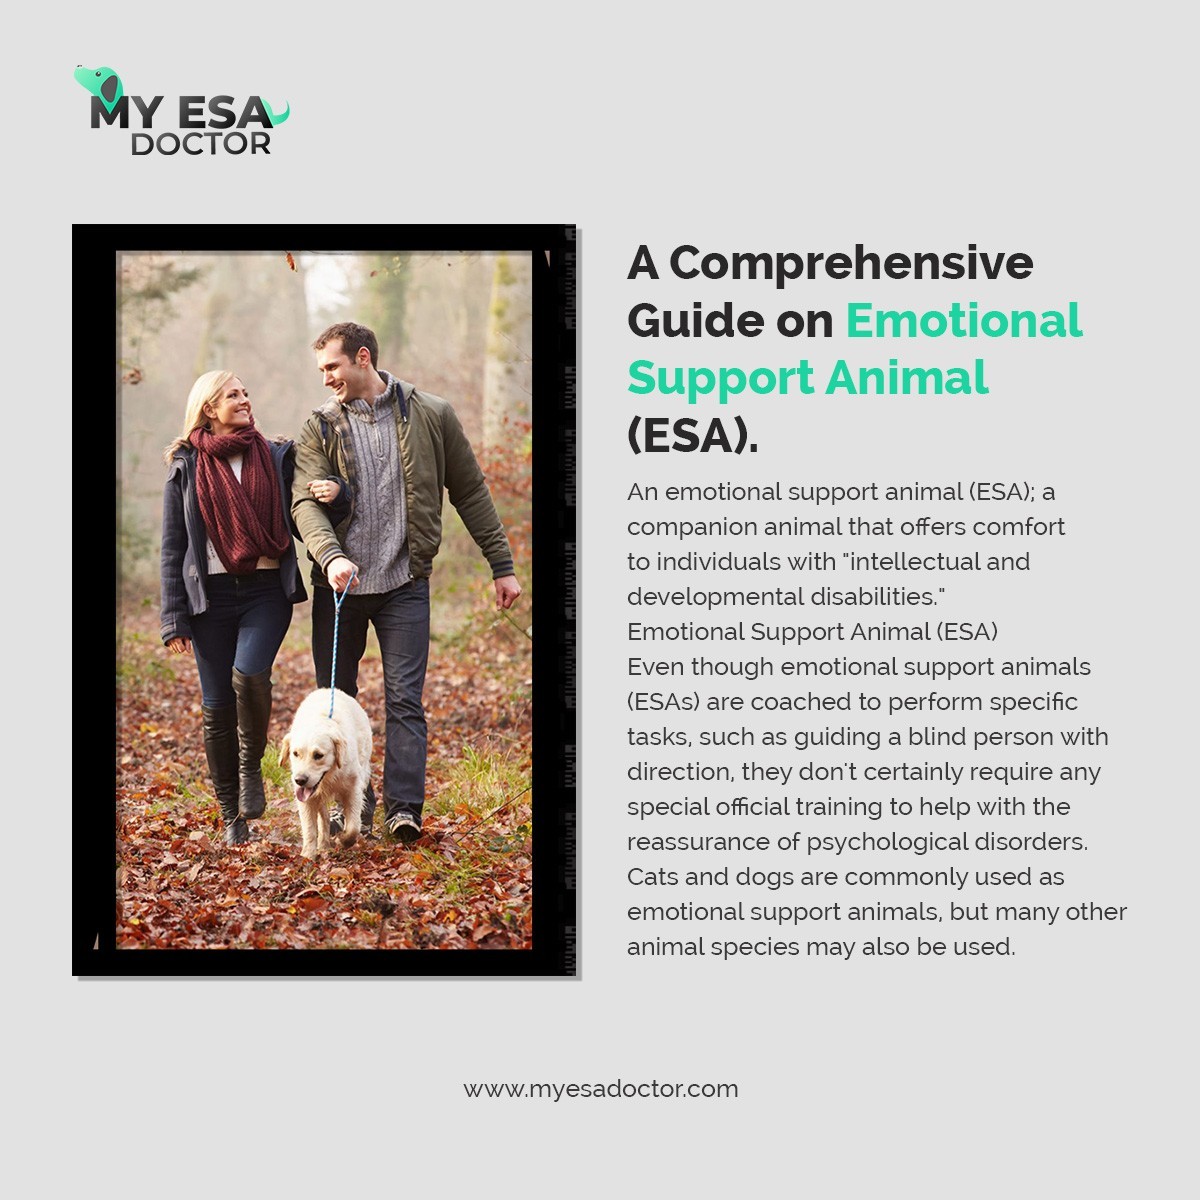 A Comprehensive Guide on Emotional Support Animal (ESA)